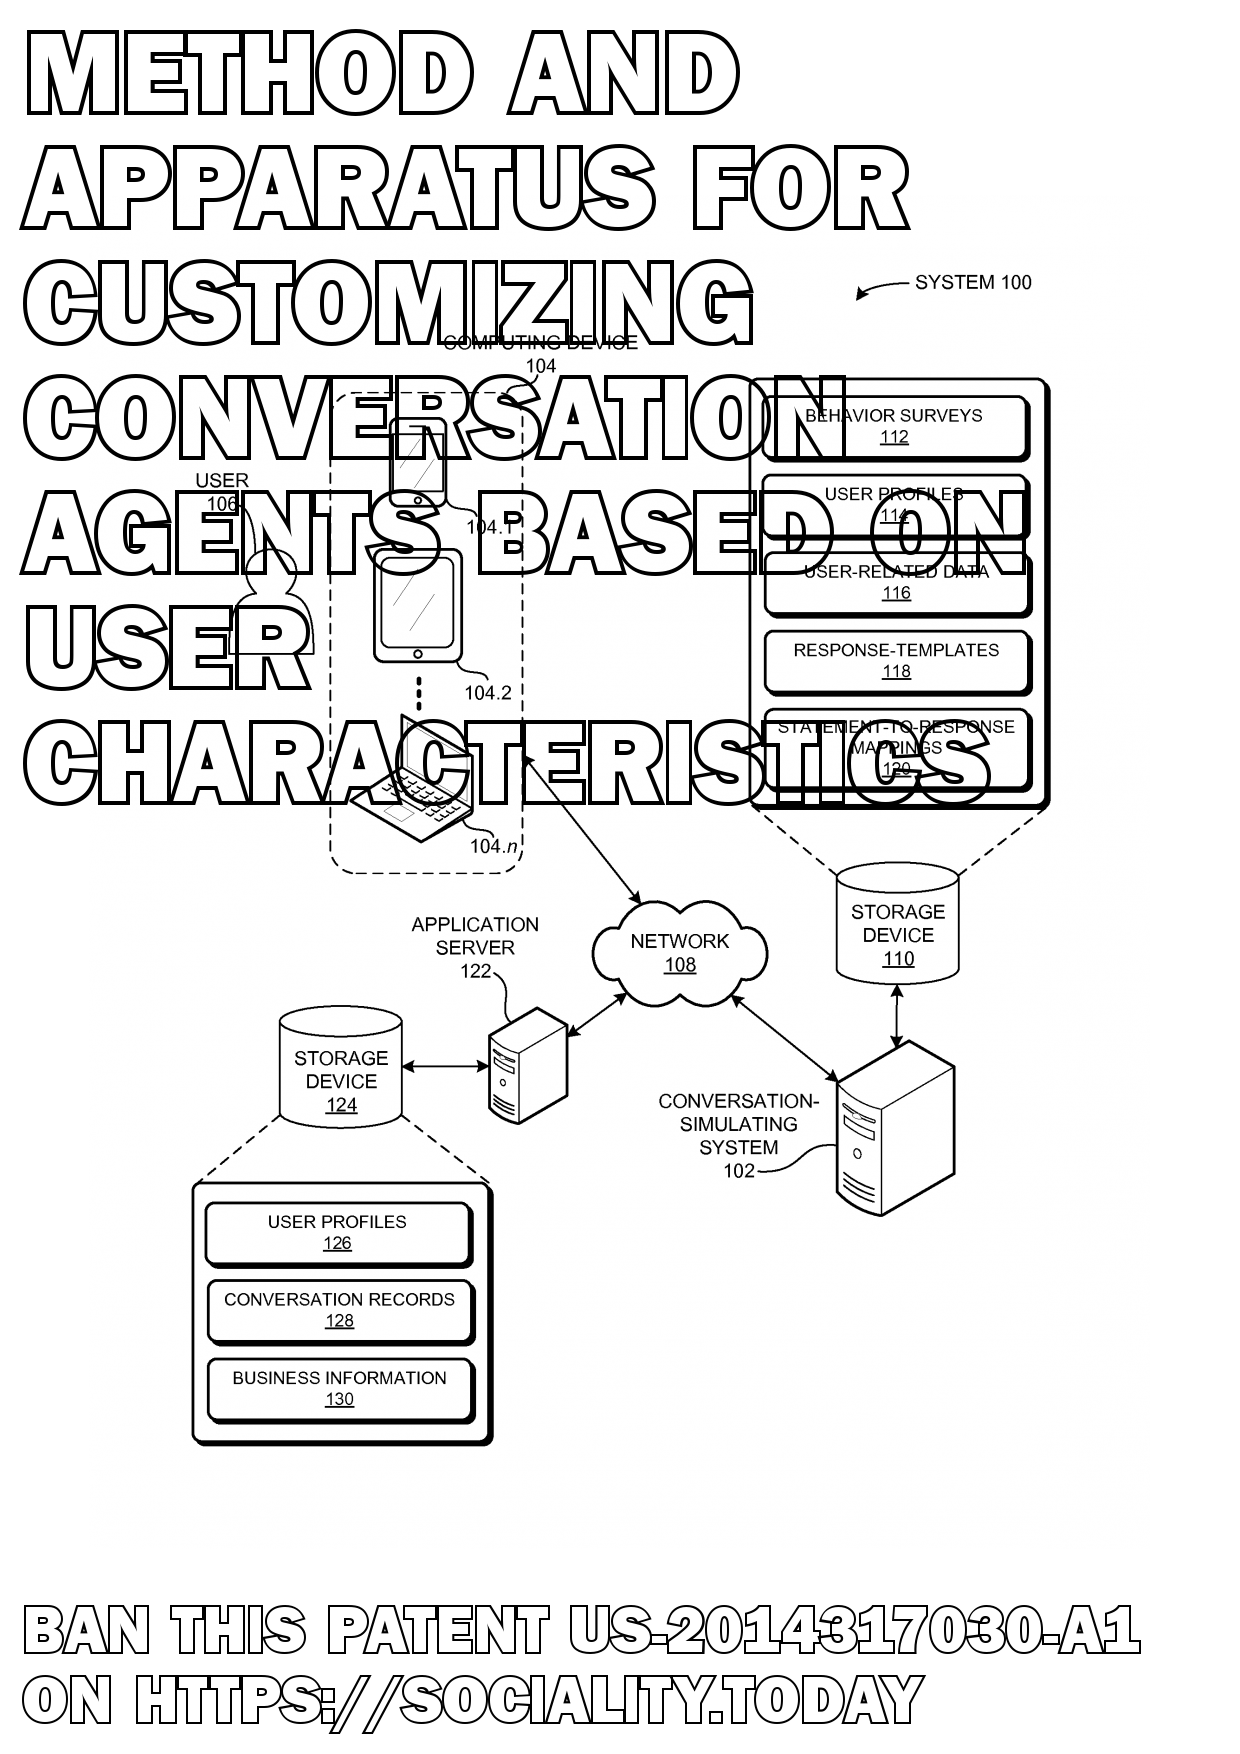 Method and apparatus for customizing conversation agents based on user characteristics  - US-2014317030-A1